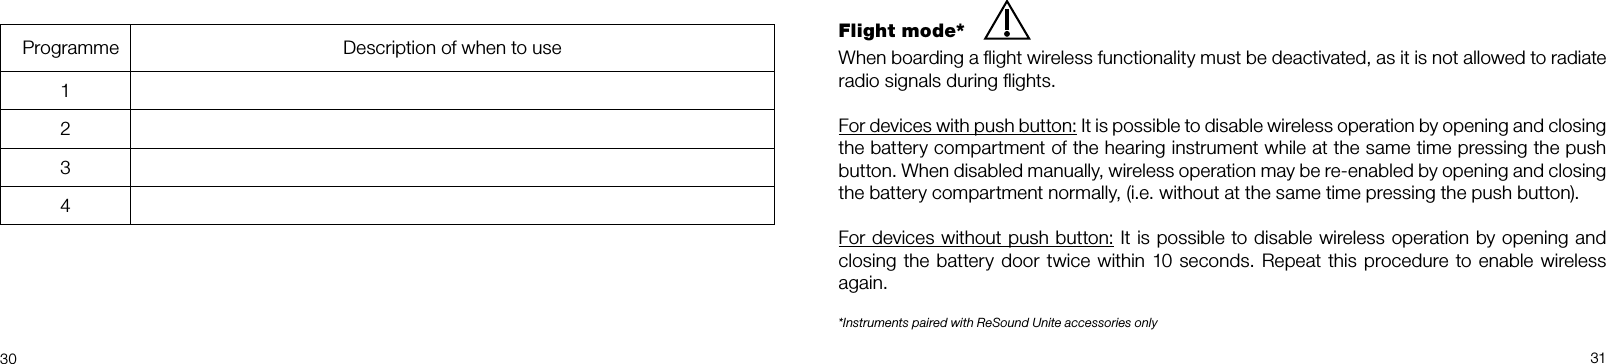  30 31Flight mode*When boarding a ﬂight wireless functionality must be deactivated, as it is not allowed to radiate radio signals during ﬂights.For devices with push button: It is possible to disable wireless operation by opening and closing the battery compartment of the hearing instrument while at the same time pressing the push button. When disabled manually, wireless operation may be re-enabled by opening and closing the battery compartment normally, (i.e. without at the same time pressing the push button). For devices without push button: It is possible to disable wireless operation by opening and closing the battery door twice within 10 seconds. Repeat this procedure to enable wireless again.*Instruments paired with ReSound Unite accessories only  Programme Description of when to use1234